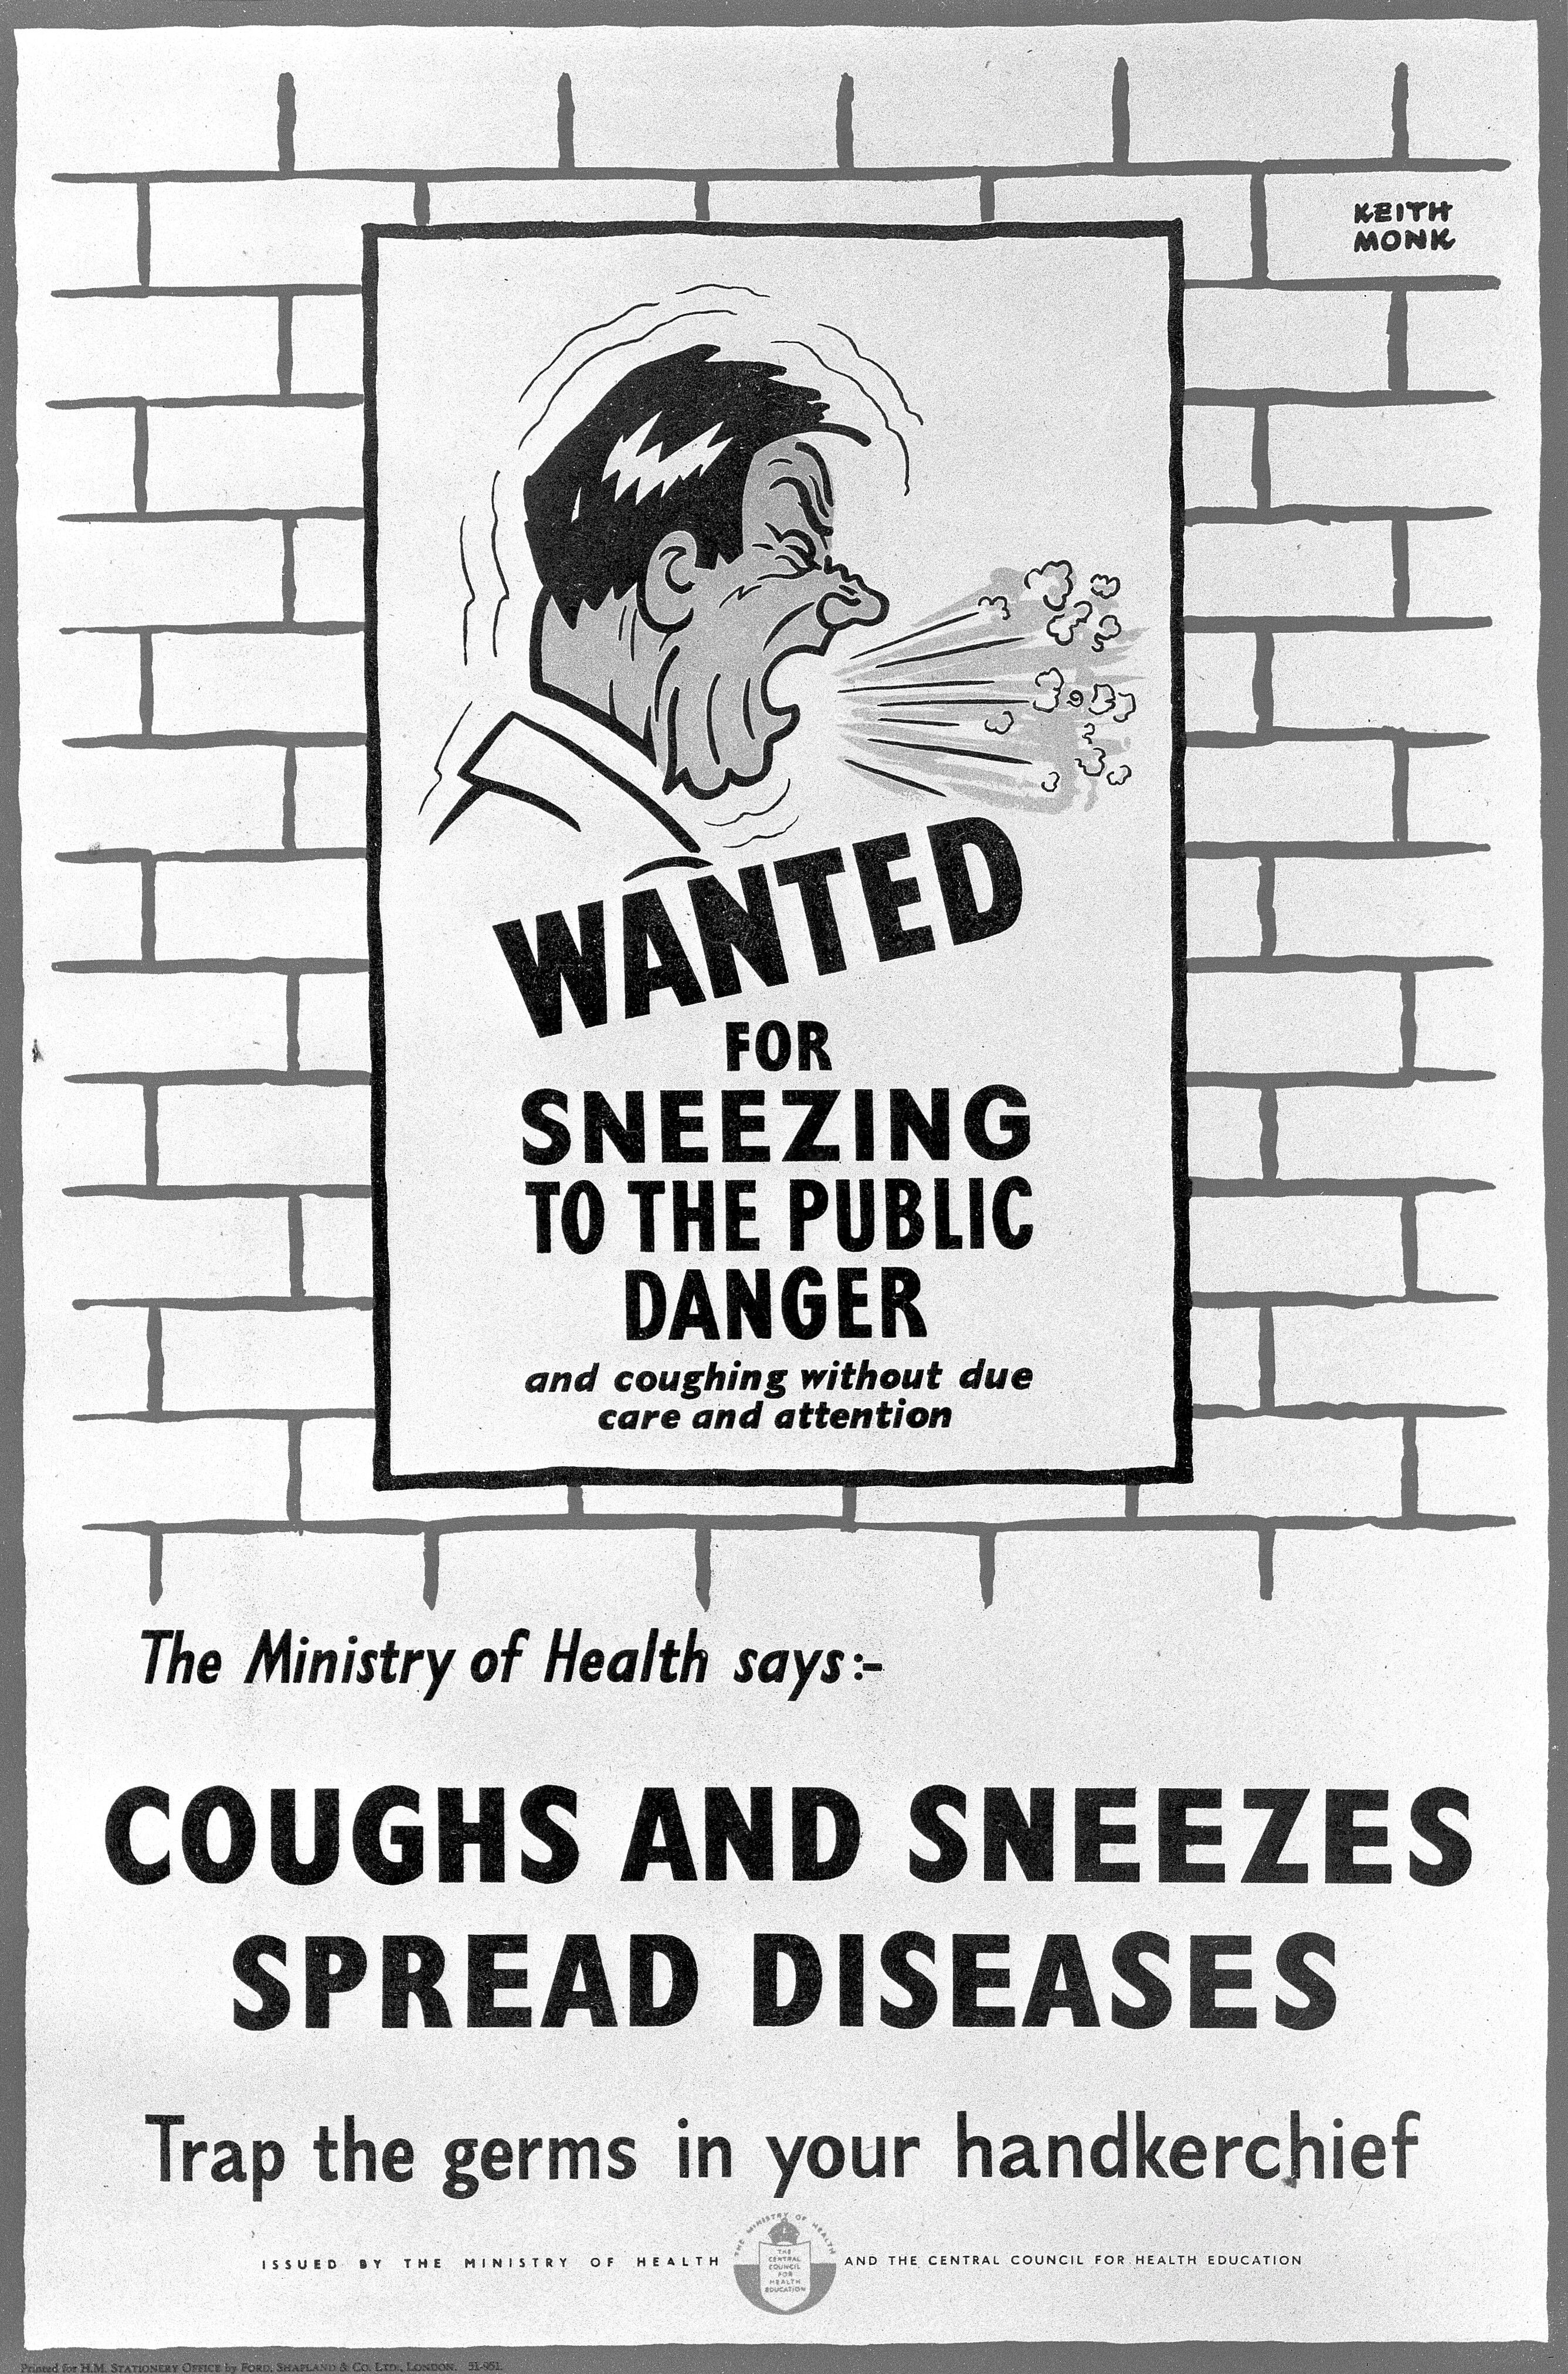 A police "Wanted" notice for a man sneezing without a handkerchief. Colour lithograph after Keith Monk.